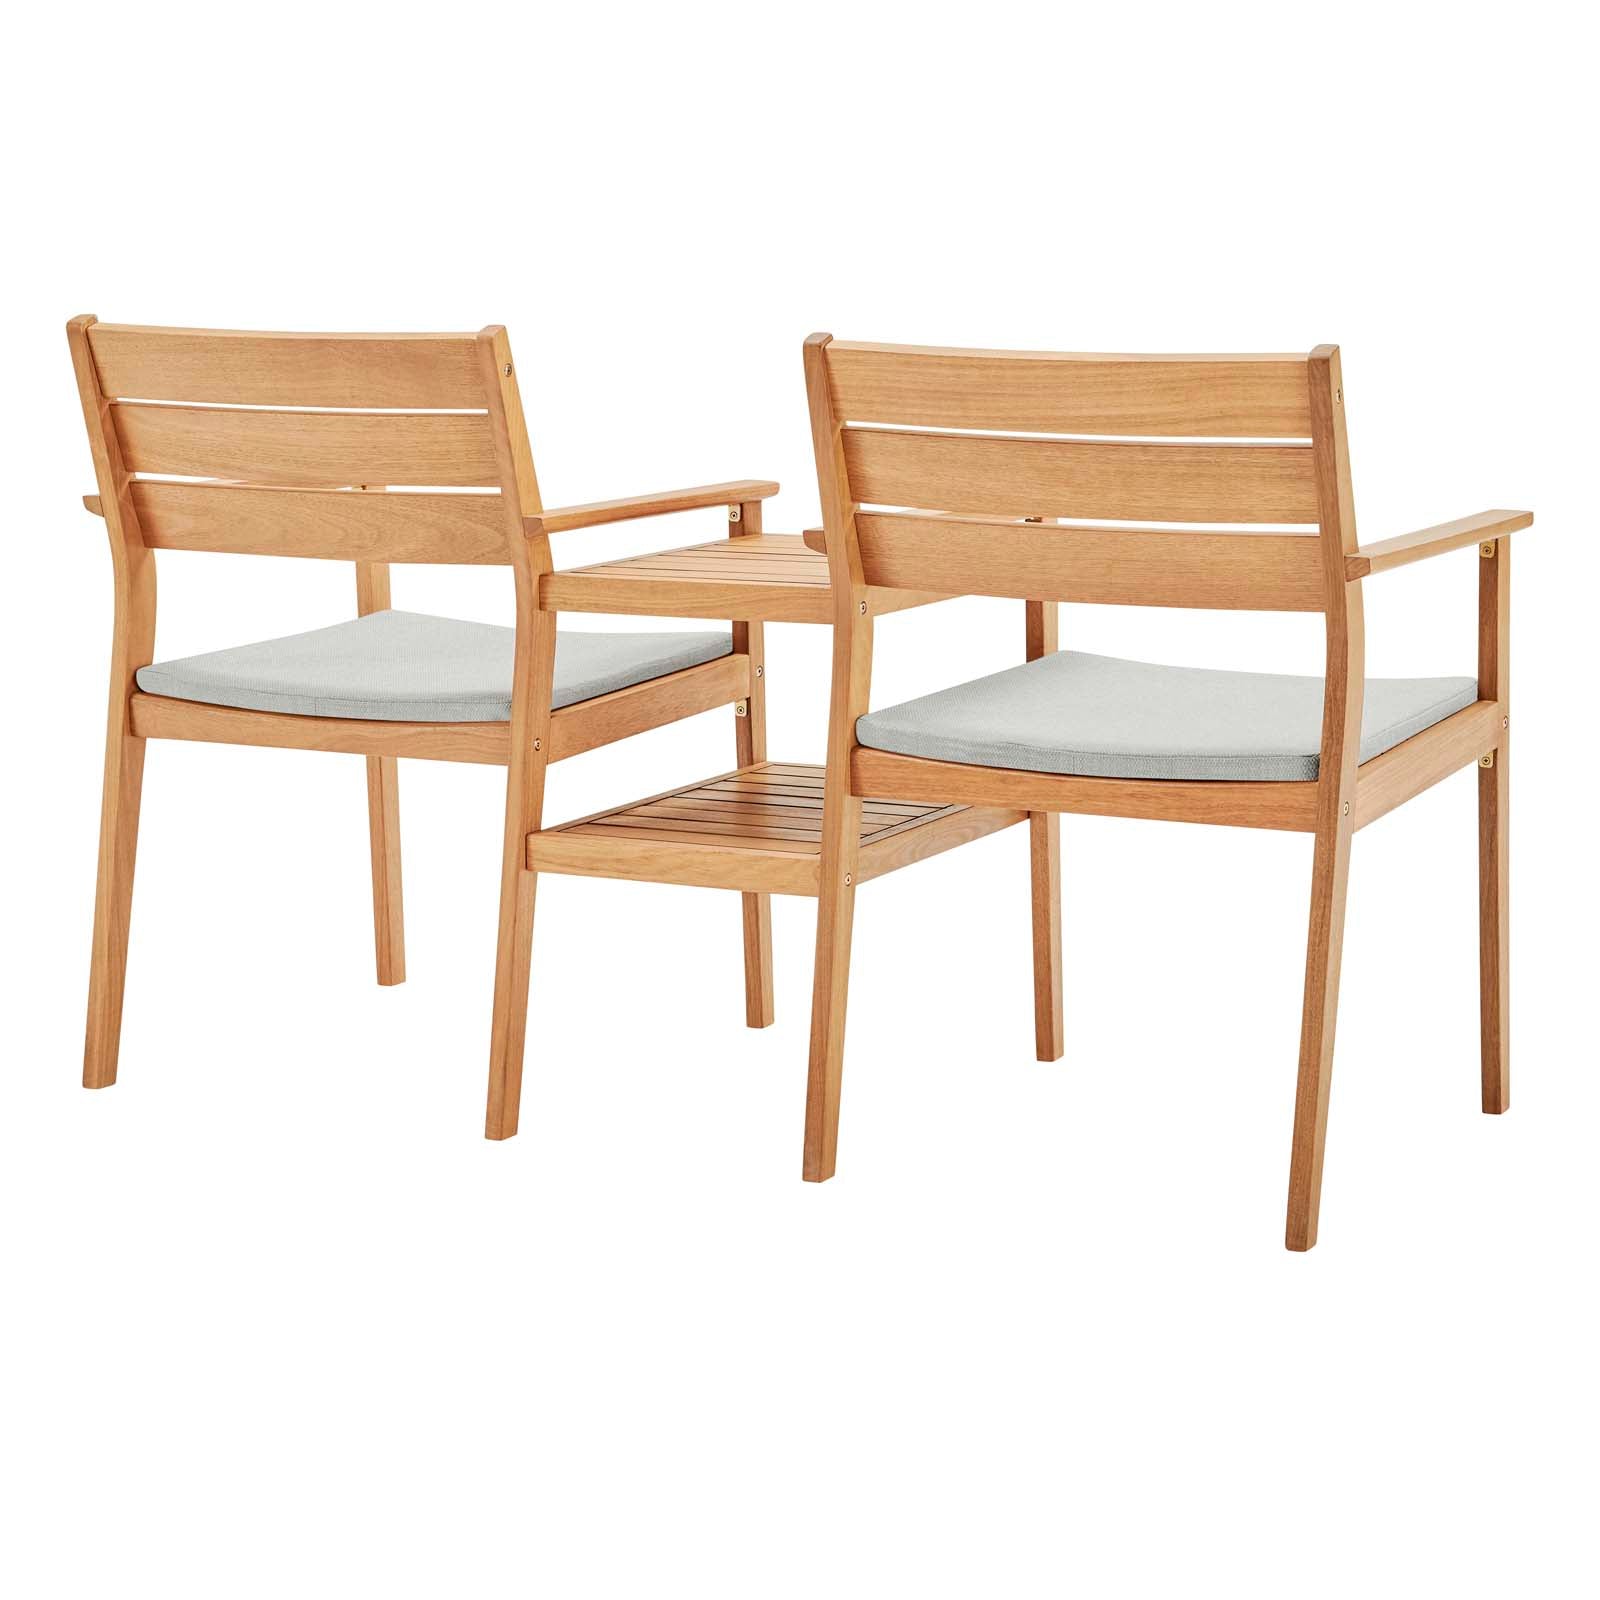 Viewscape Outdoor Patio Ash Wood Jack and Jill Chair Set - East Shore Modern Home Furnishings